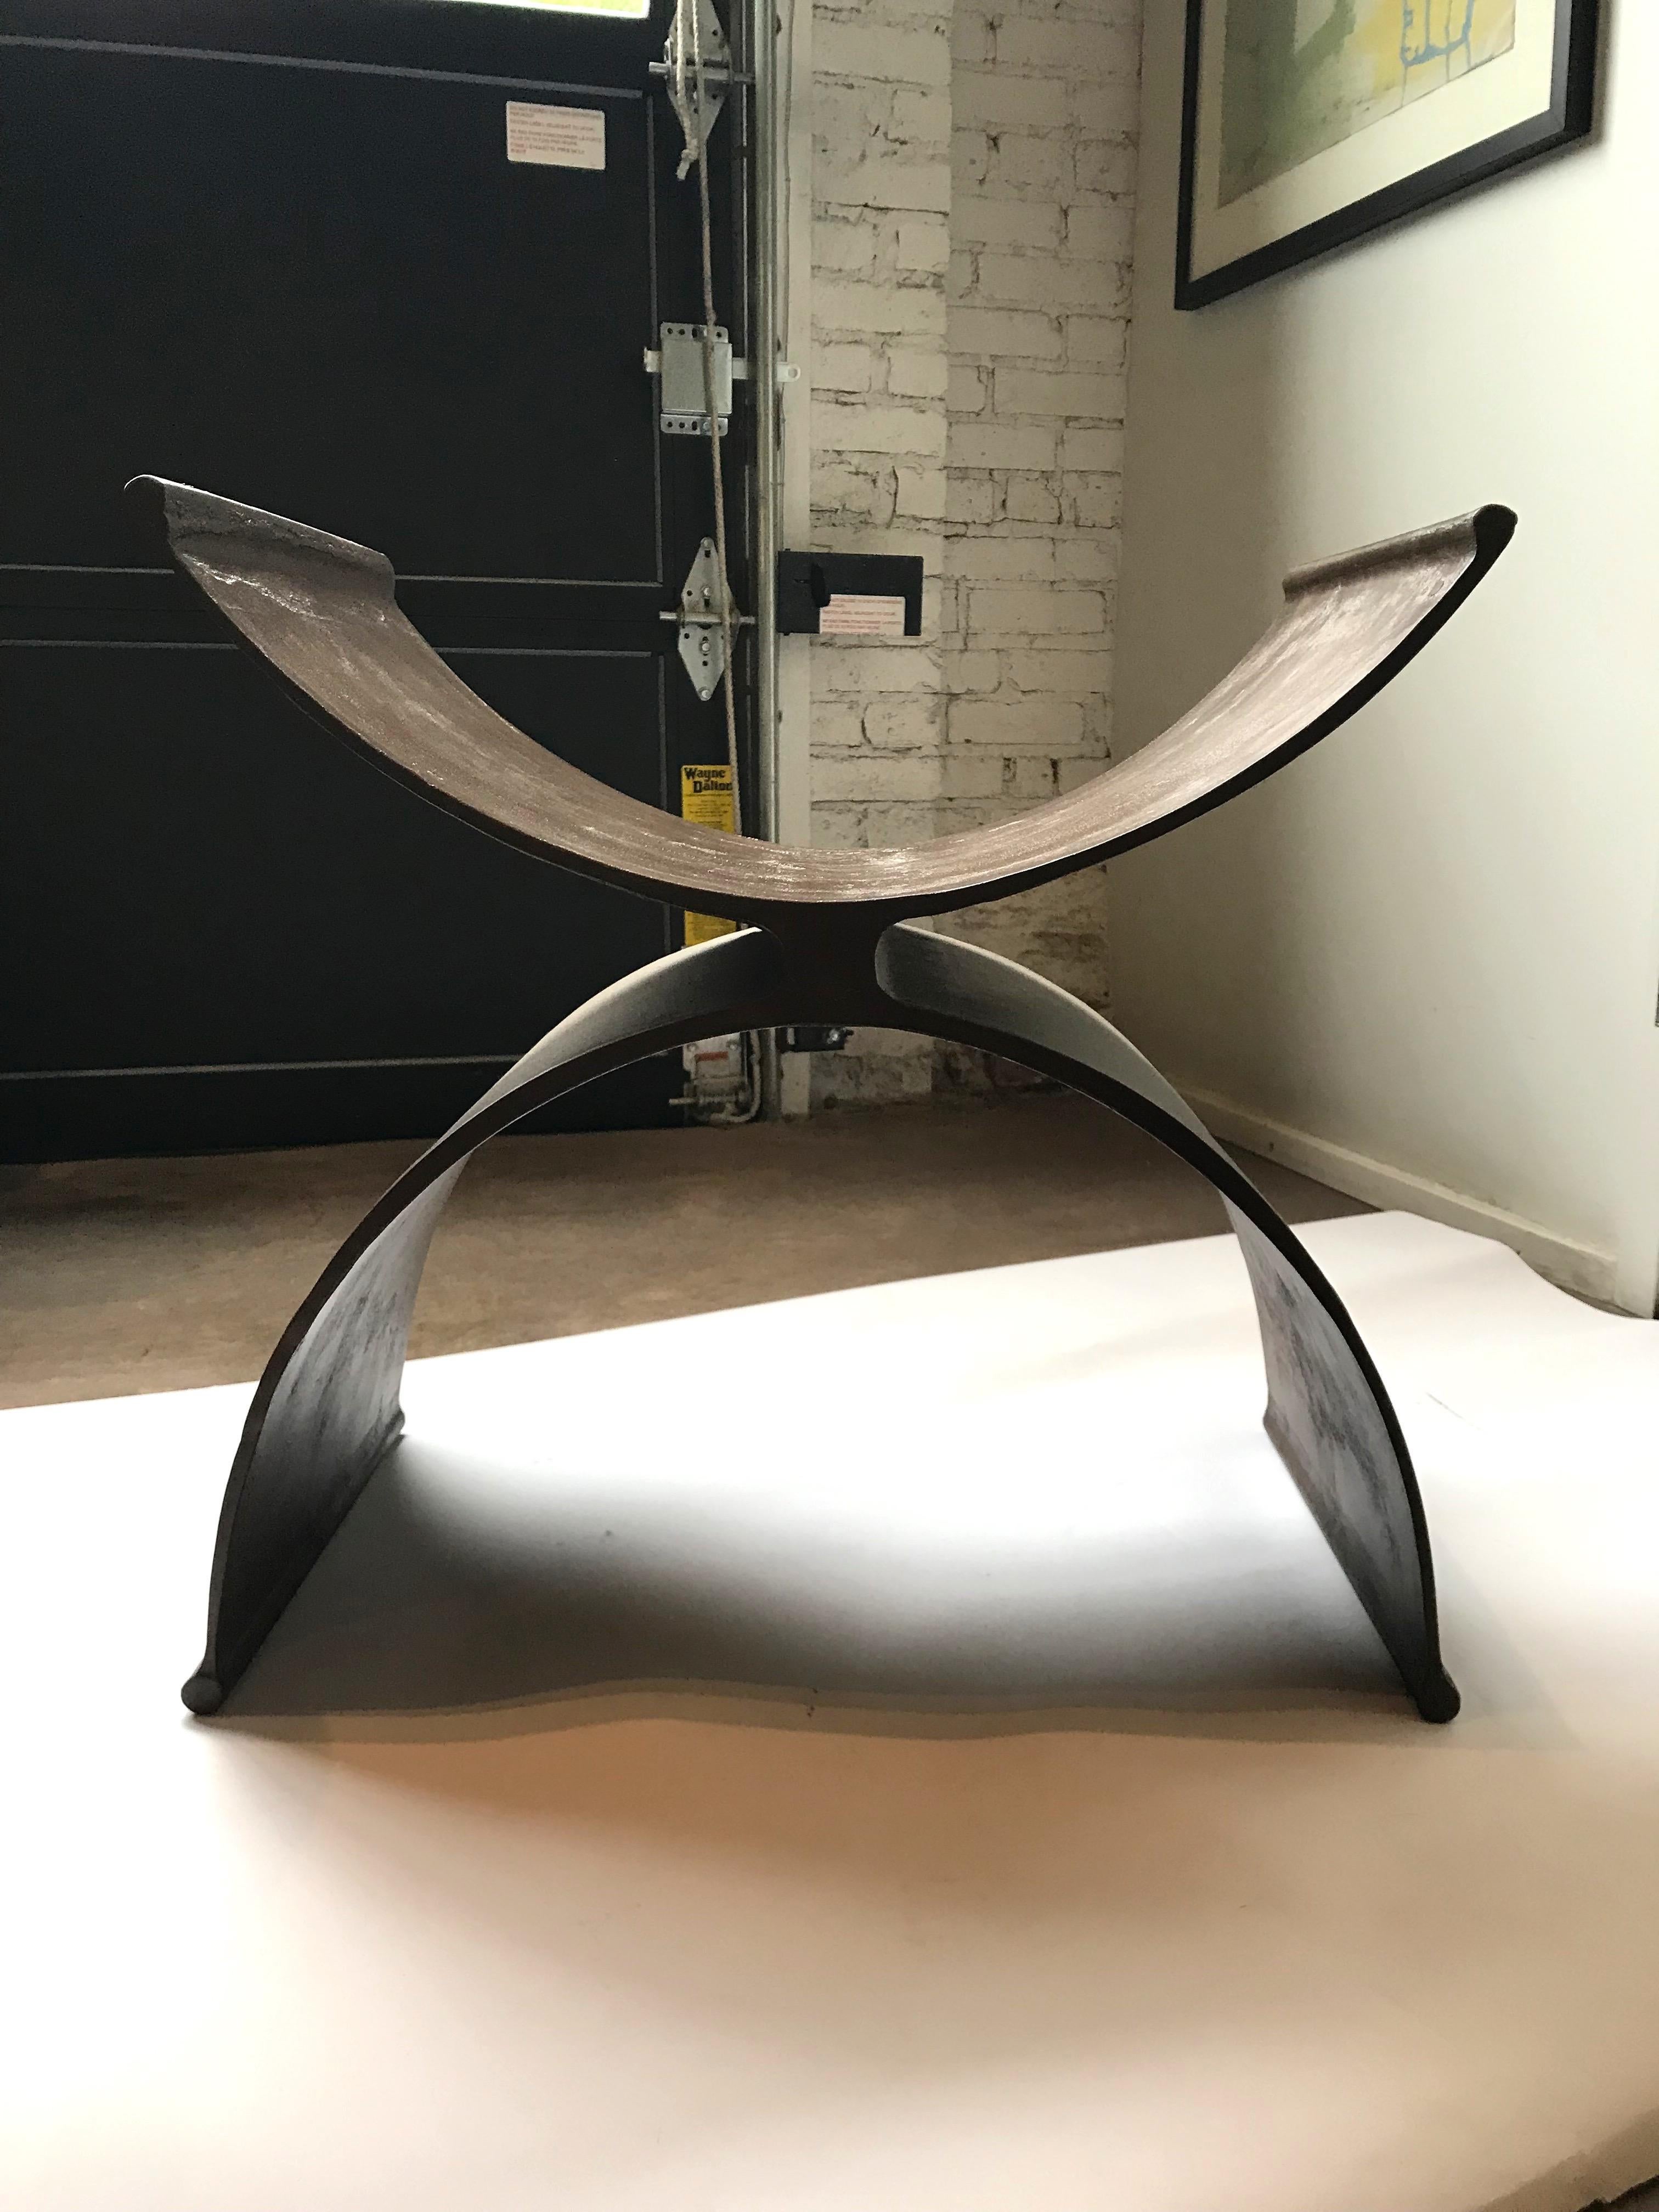 Contemporary 21st Century Reflection Stool by Michael Del Piero -Rusty Finish Aluminum  For Sale